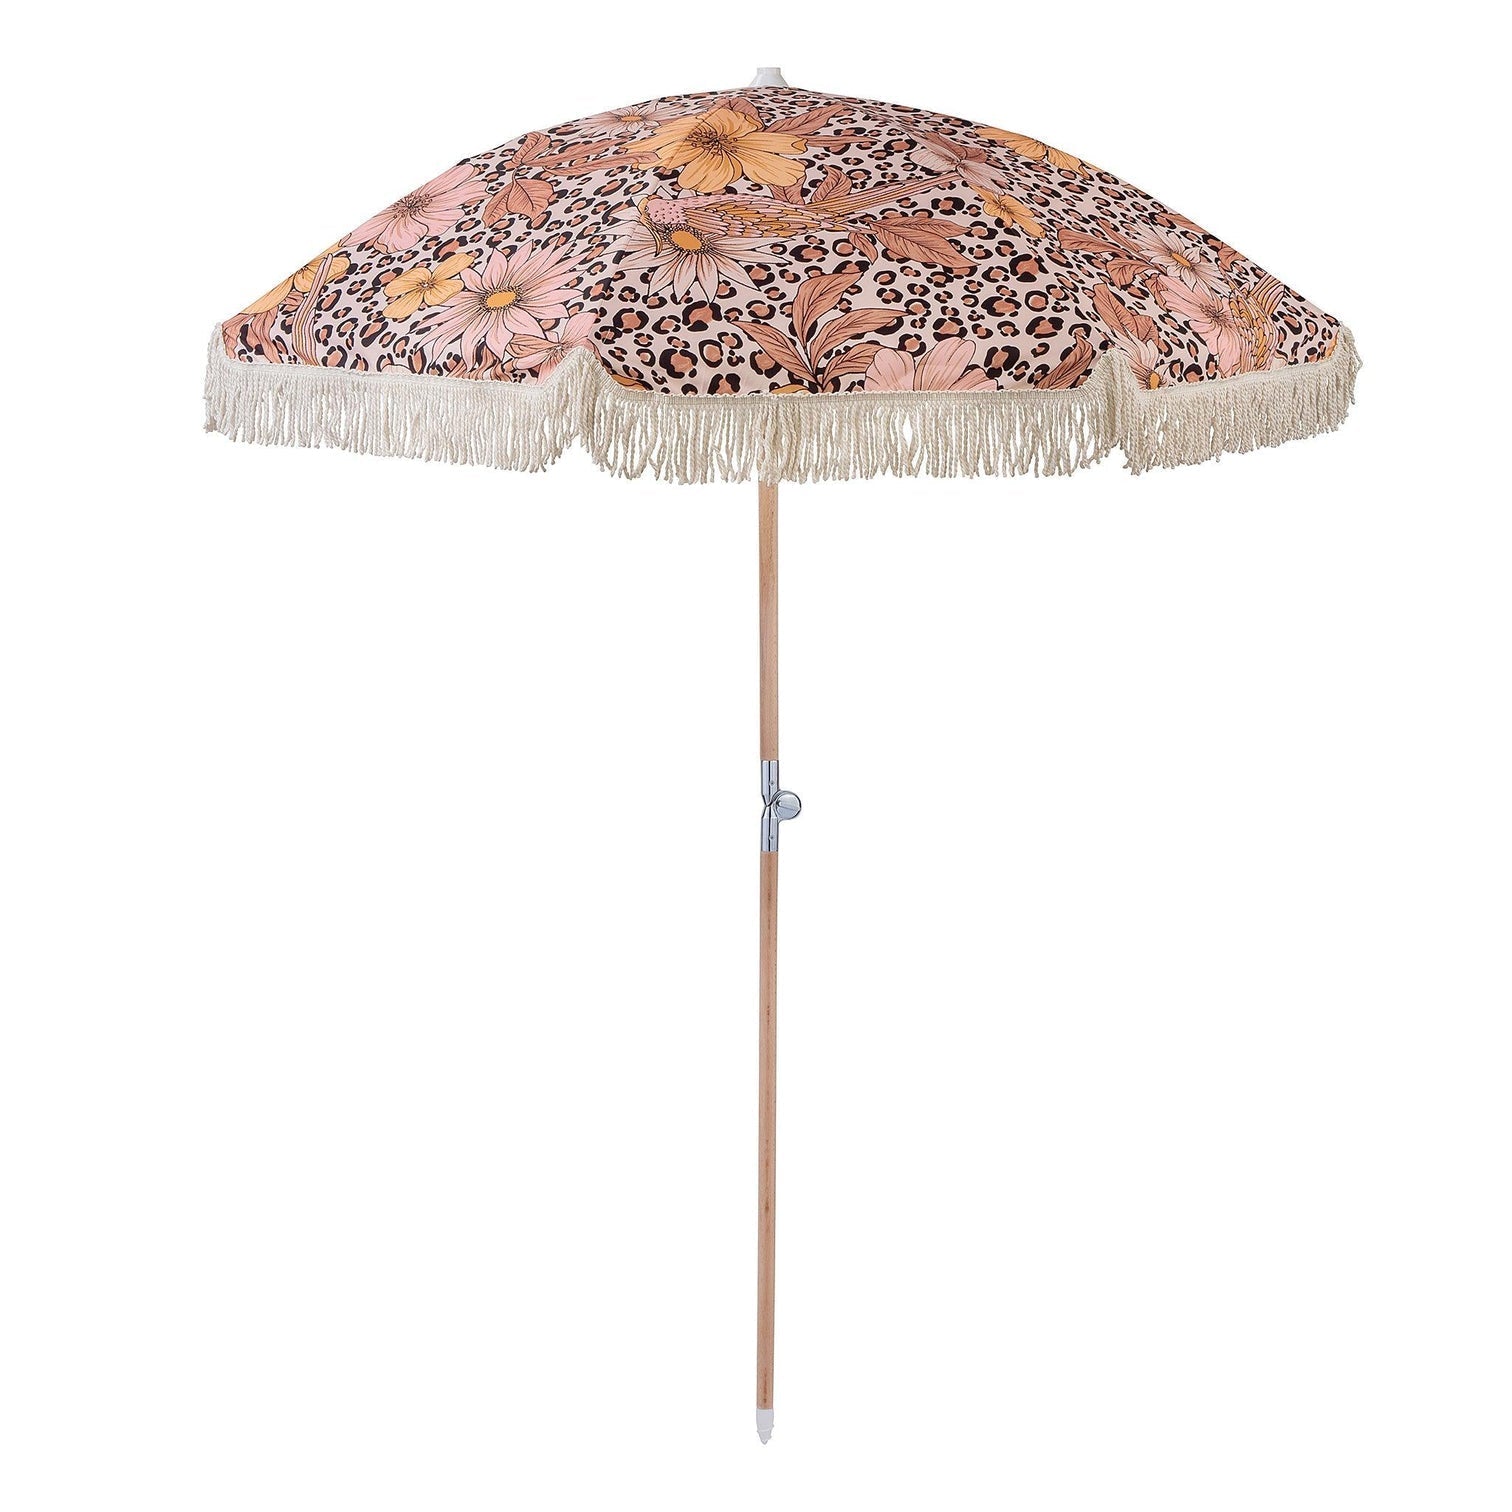 Umbrella Large Leopard Floral-Travel & Outdoors-Kollab-The Bay Room